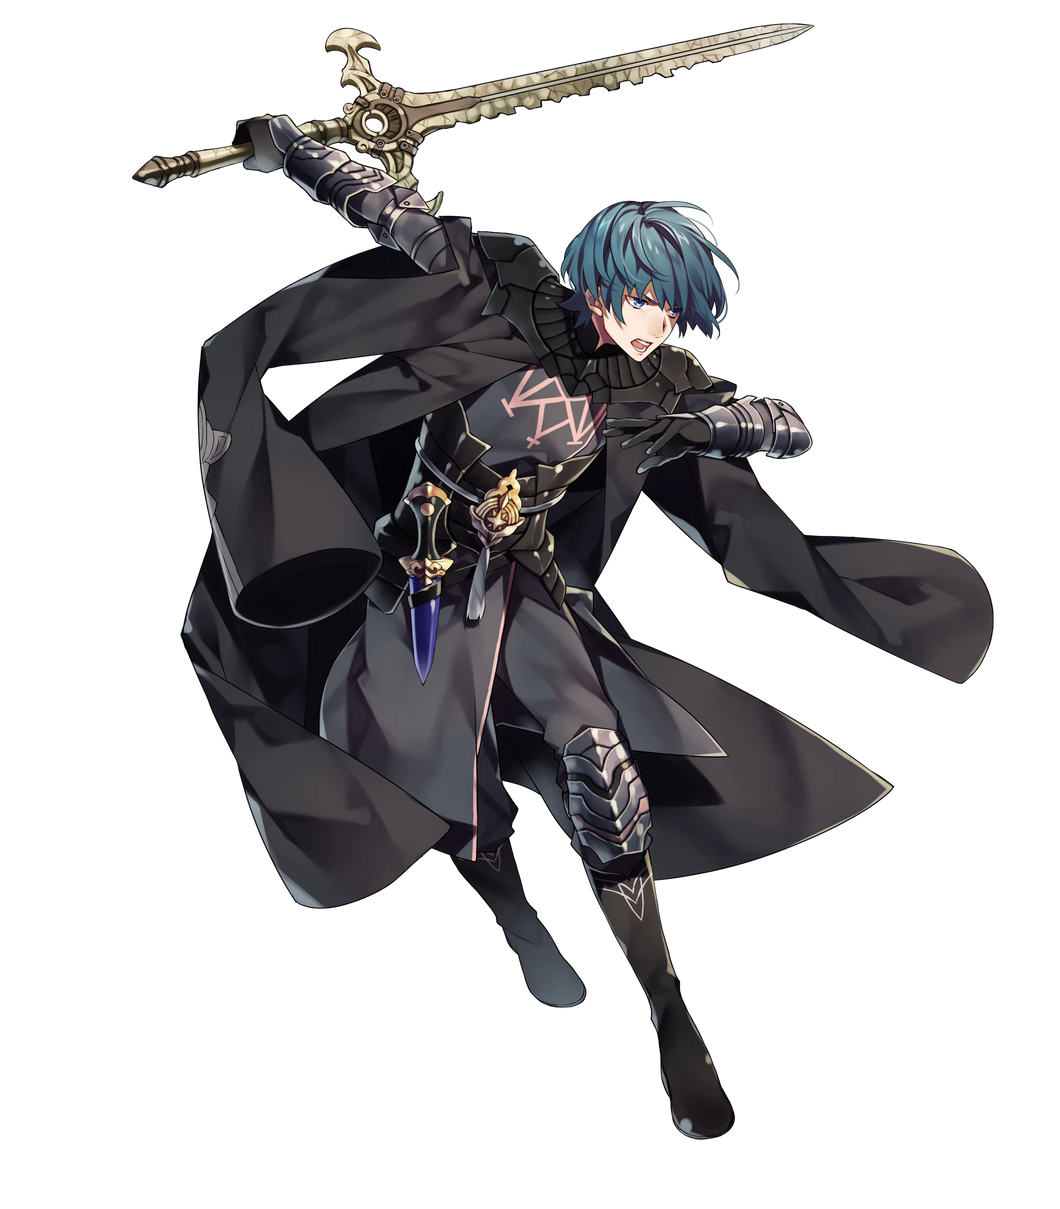 FEH Male Byleth Fight ver.